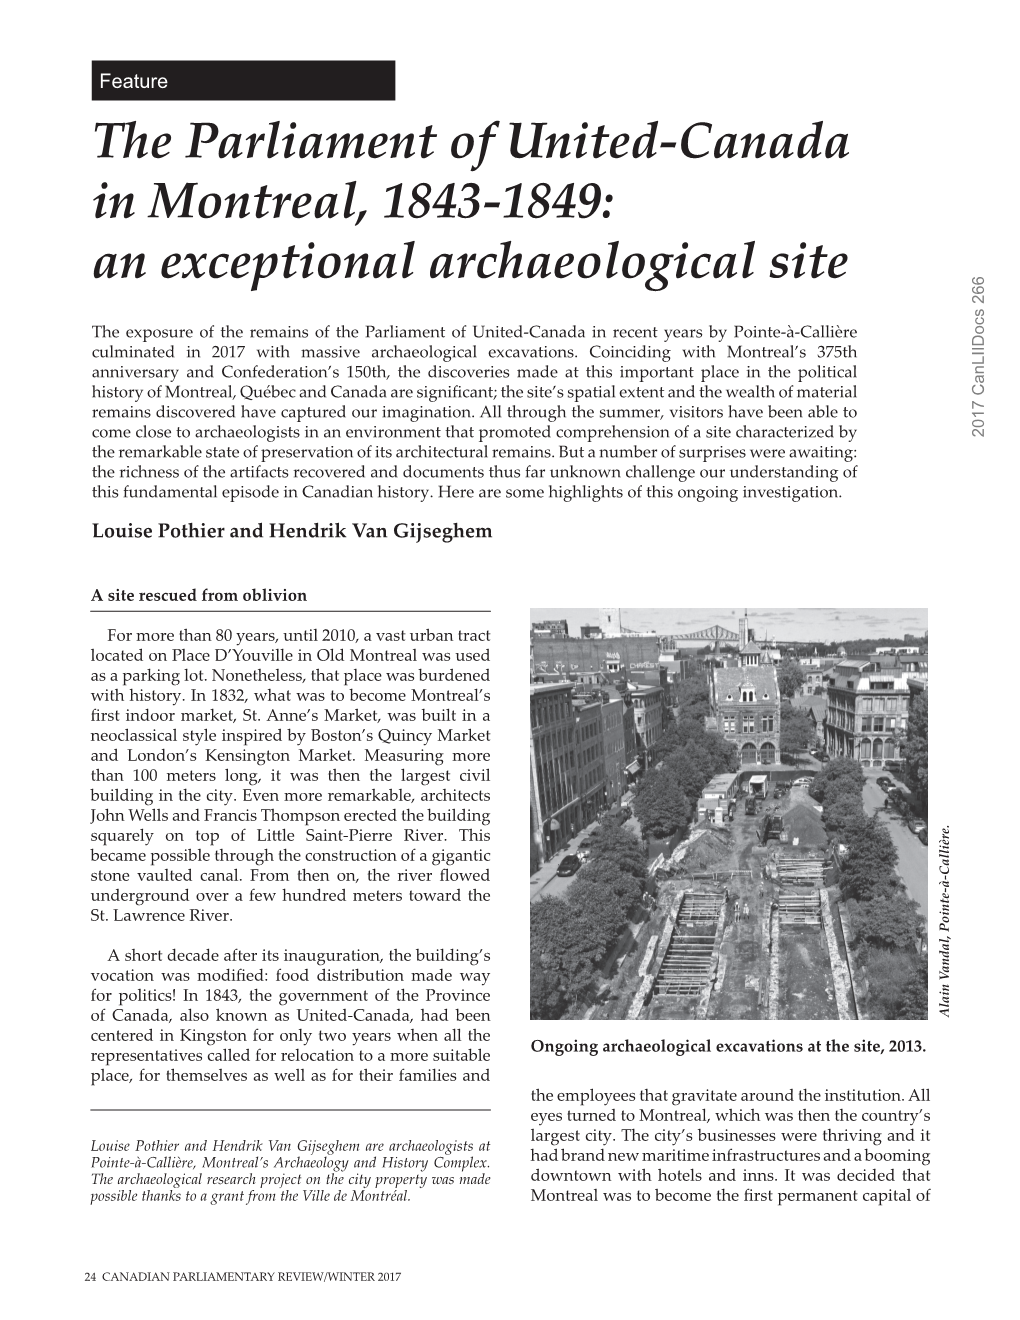 The Parliament of United-Canada in Montreal, 1843-1849: an Exceptional Archaeological Site